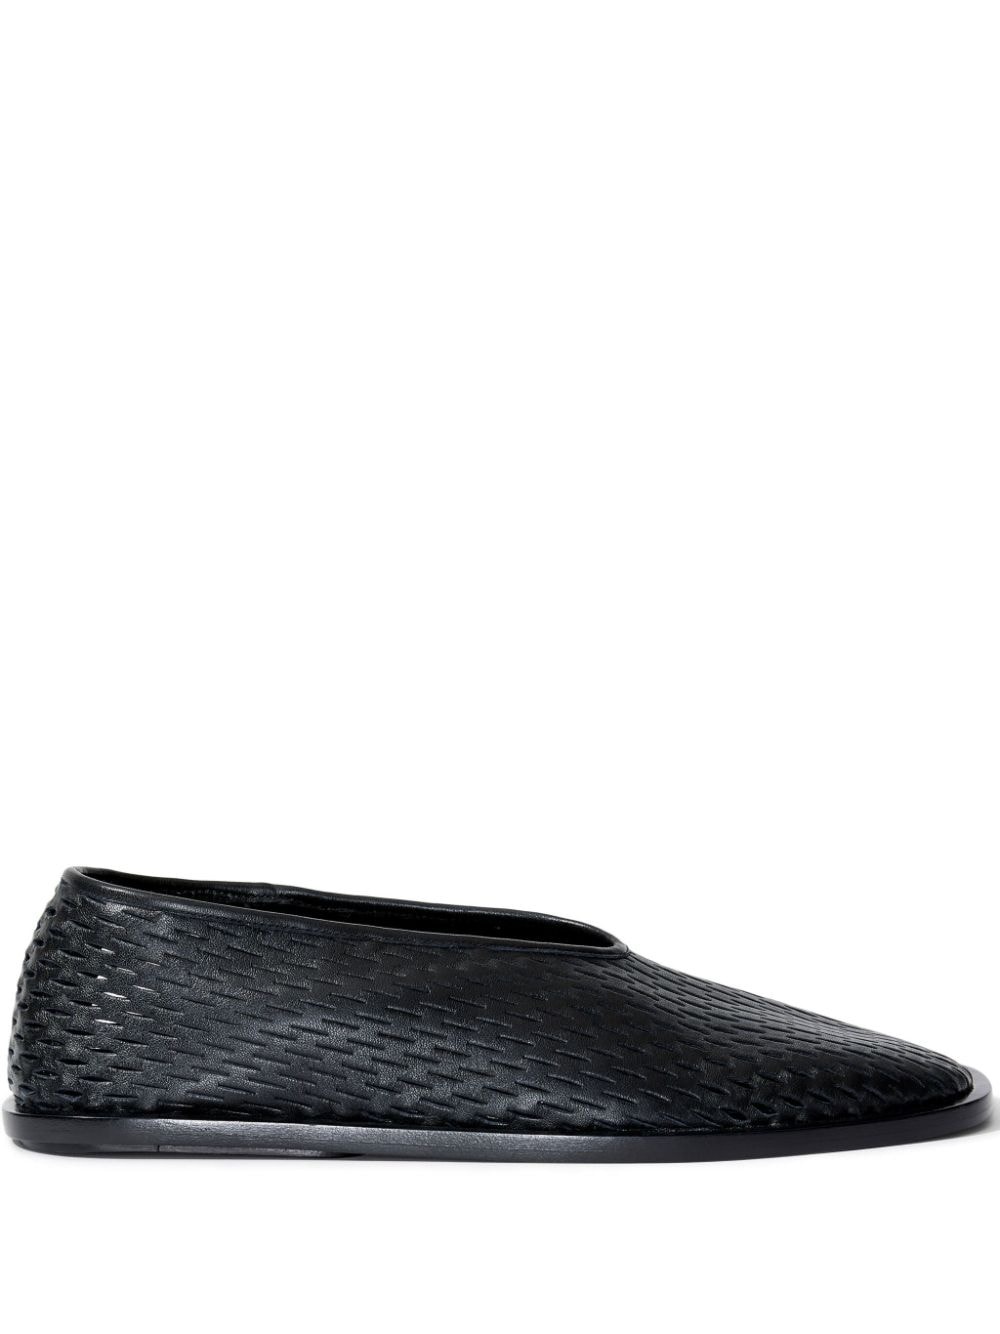 square perforated slippers - 1